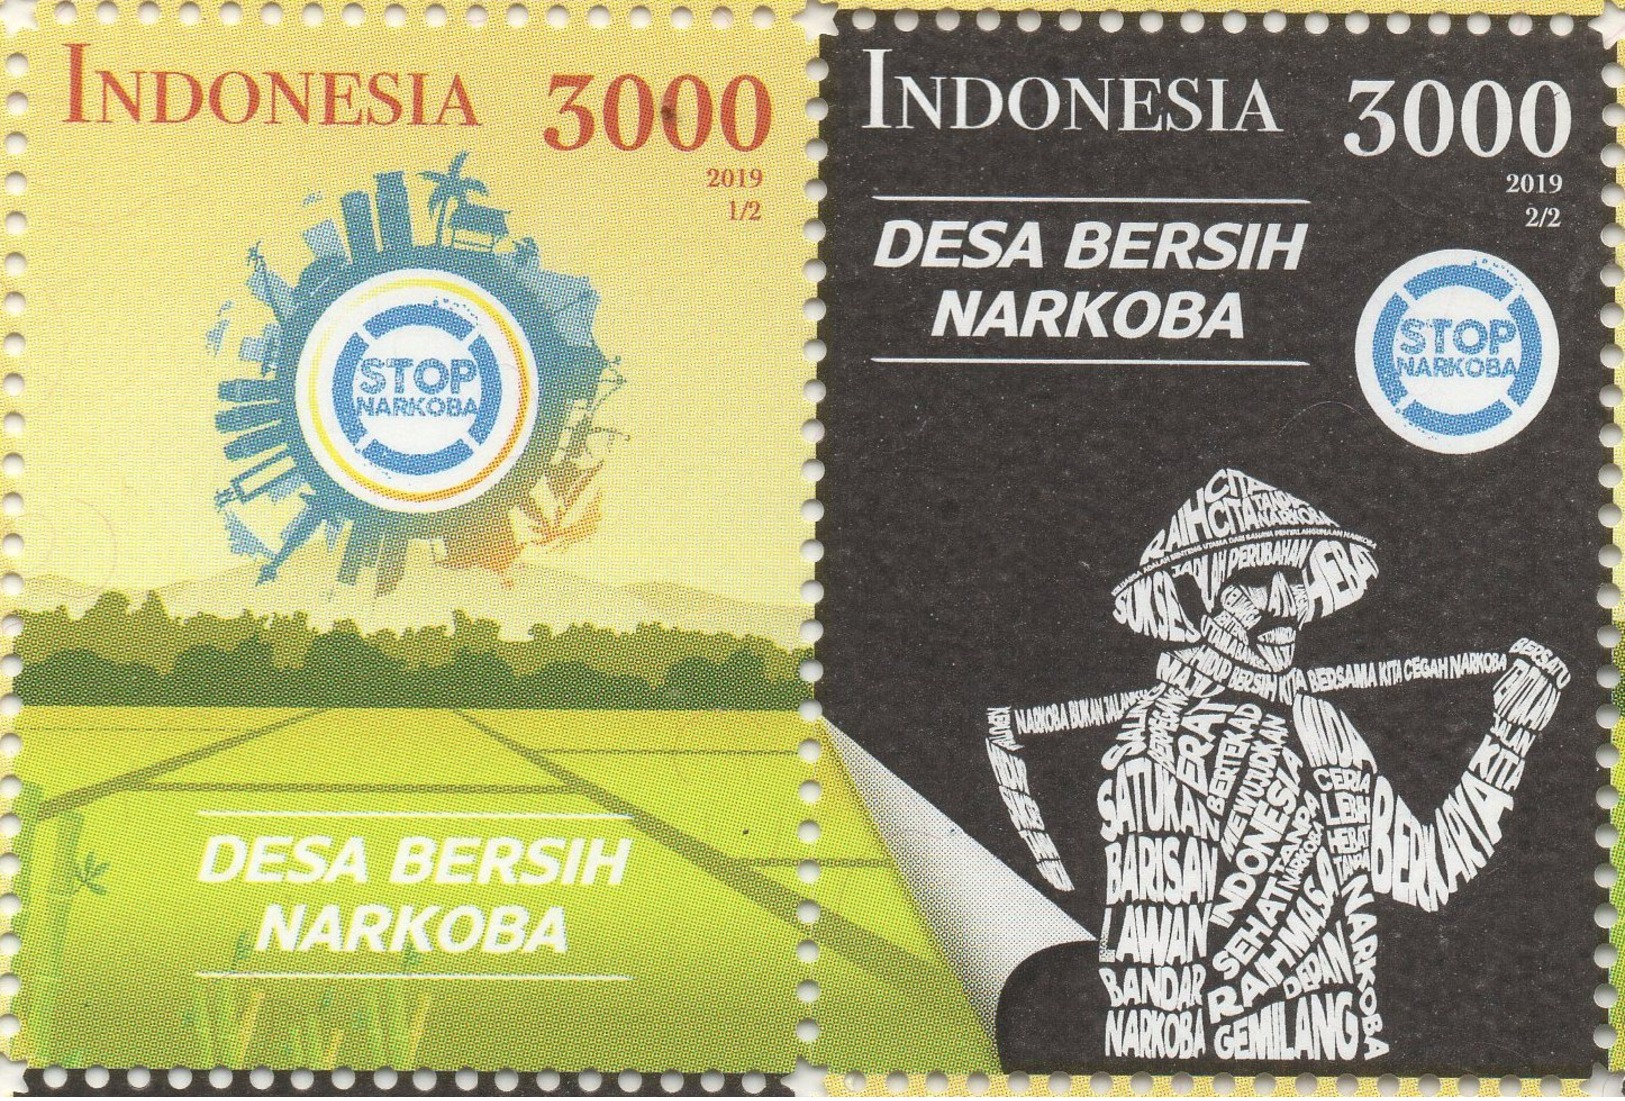 INDONESIA 2019-7 STOP DRUGS SET STAMPS MNH - Indonesia